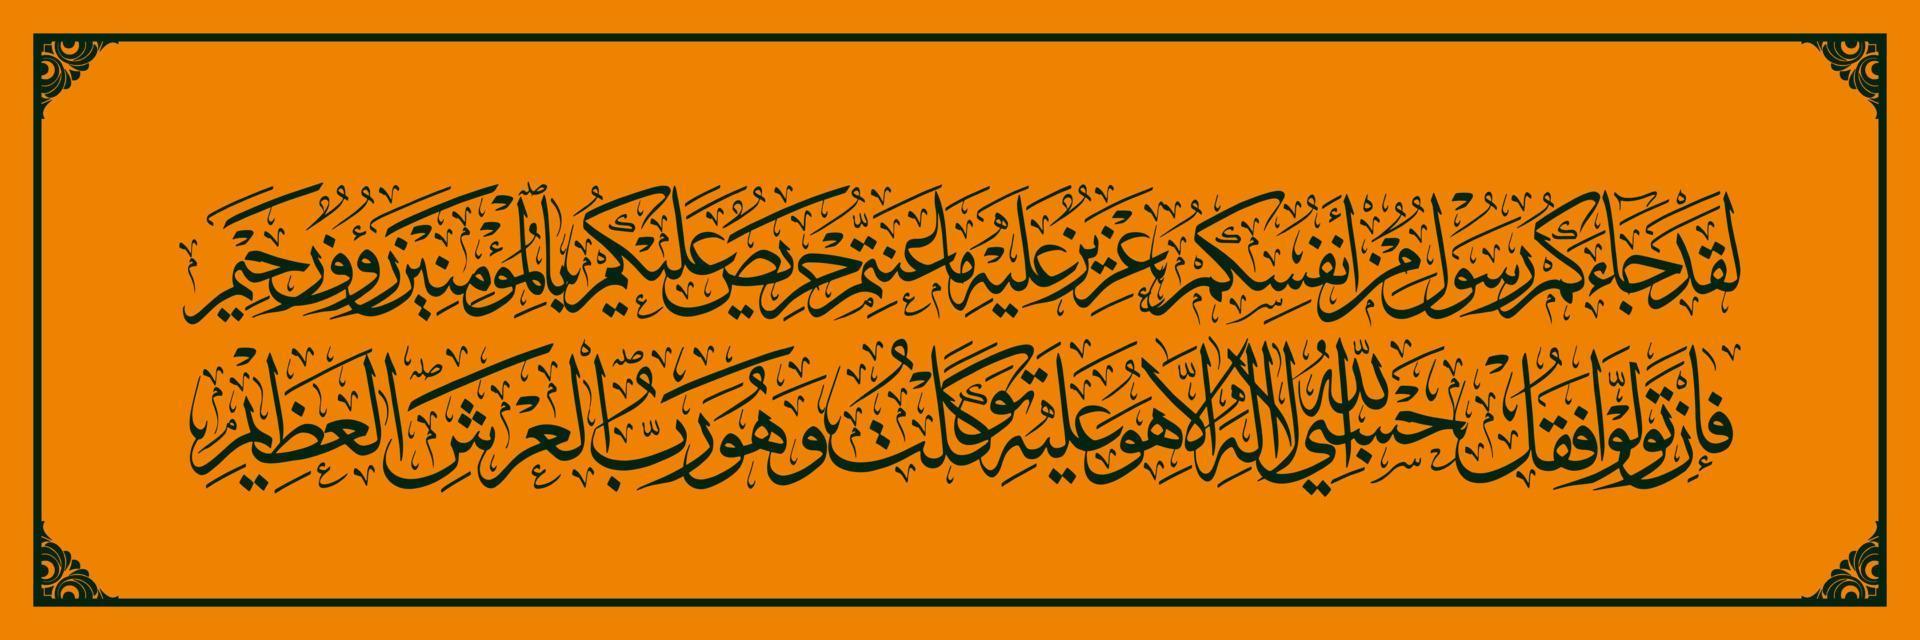 Arabic calligraphy, Quran Surah At Taubah Verses 128 129, translation dTruly, a messenger has come to you from your own people vector